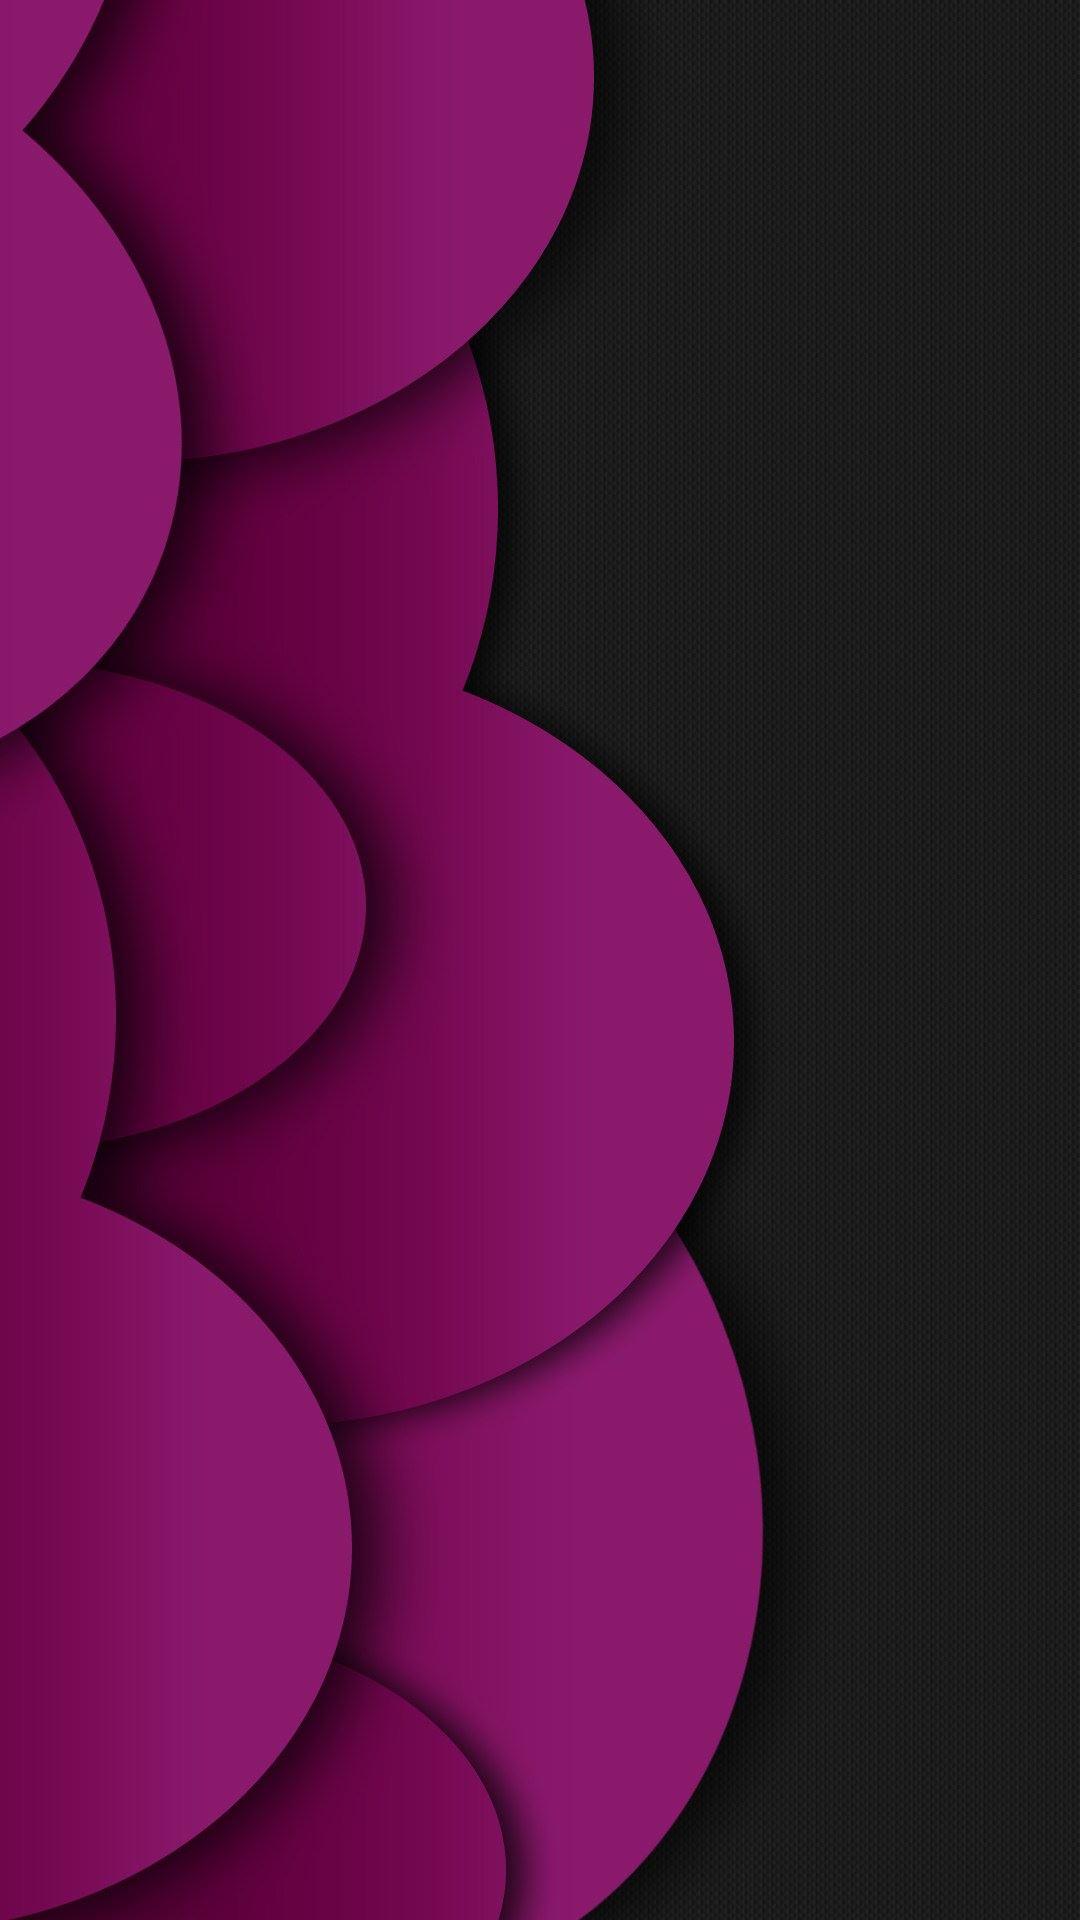 Purple Hearts Pattern Grey Background Android Wallpaper free download